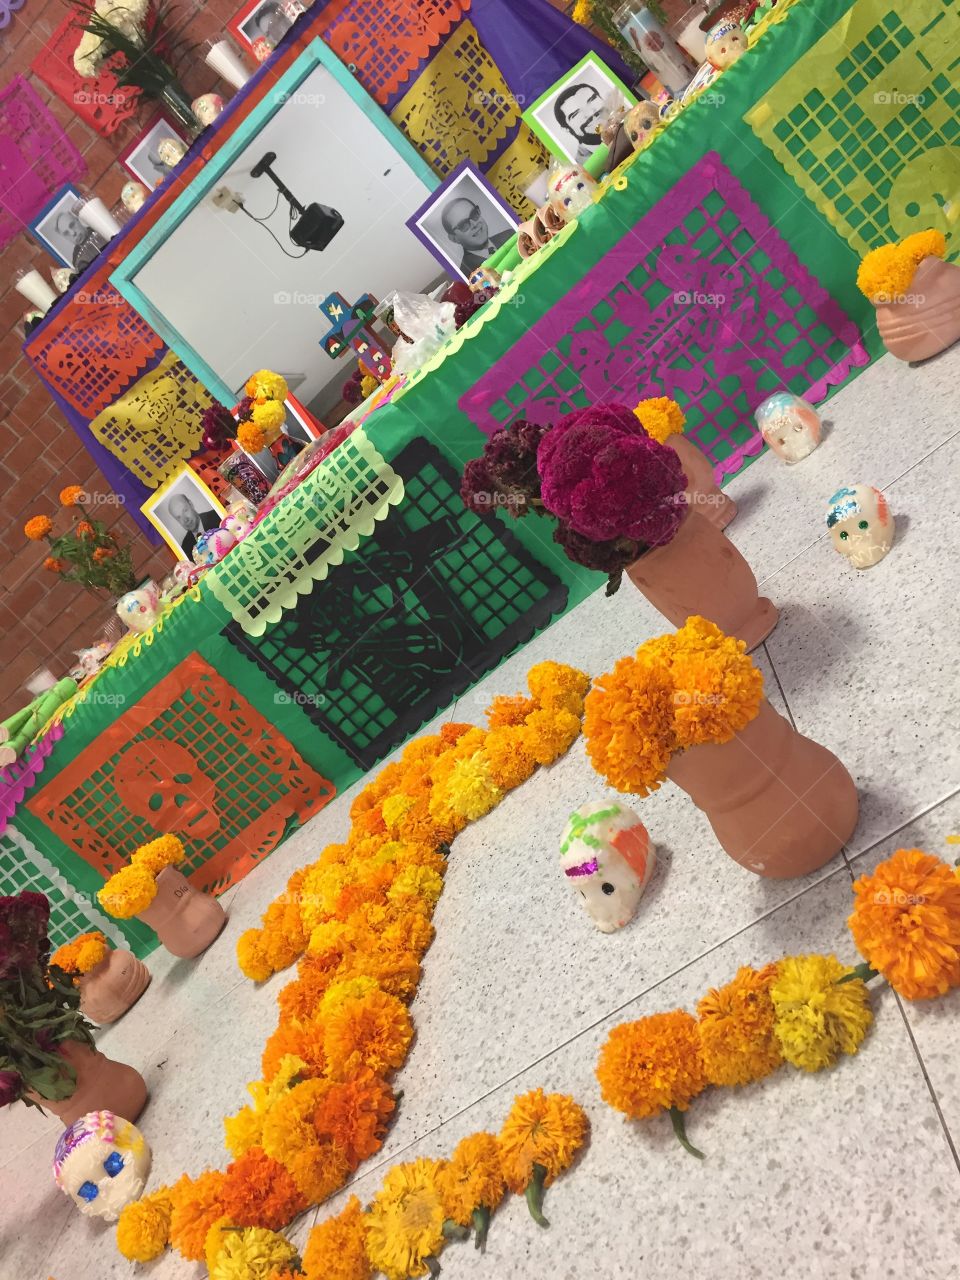 Celebration of day of the dead in mexico